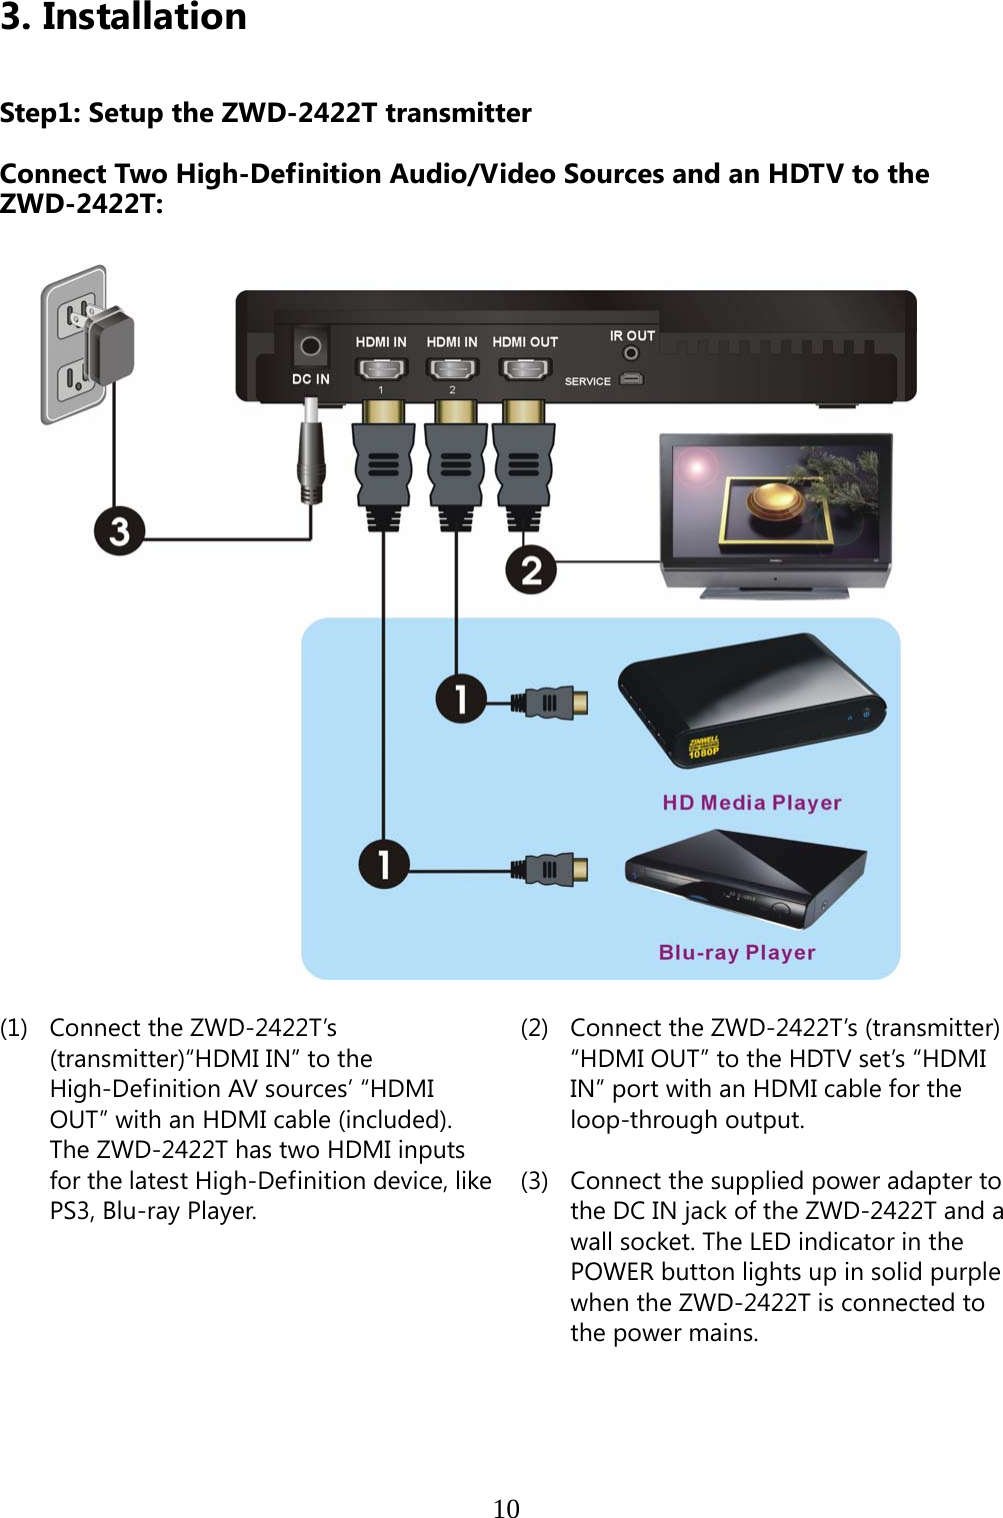    103. Installation   Step1: Setup the ZWD-2422T transmitter    Connect Two High-Definition Audio/Video Sources and an HDTV to the ZWD-2422T:                           (1) Connect the ZWD-2422T’s (transmitter)“HDMI IN” to the High-Definition AV sources’ “HDMI OUT” with an HDMI cable (included). The ZWD-2422T has two HDMI inputs for the latest High-Definition device, like PS3, Blu-ray Player.                               (2)  Connect the ZWD-2422T’s (transmitter) “HDMI OUT” to the HDTV set’s “HDMI IN” port with an HDMI cable for the loop-through output.  (3)  Connect the supplied power adapter to the DC IN jack of the ZWD-2422T and a wall socket. The LED indicator in the POWER button lights up in solid purple when the ZWD-2422T is connected to the power mains. 